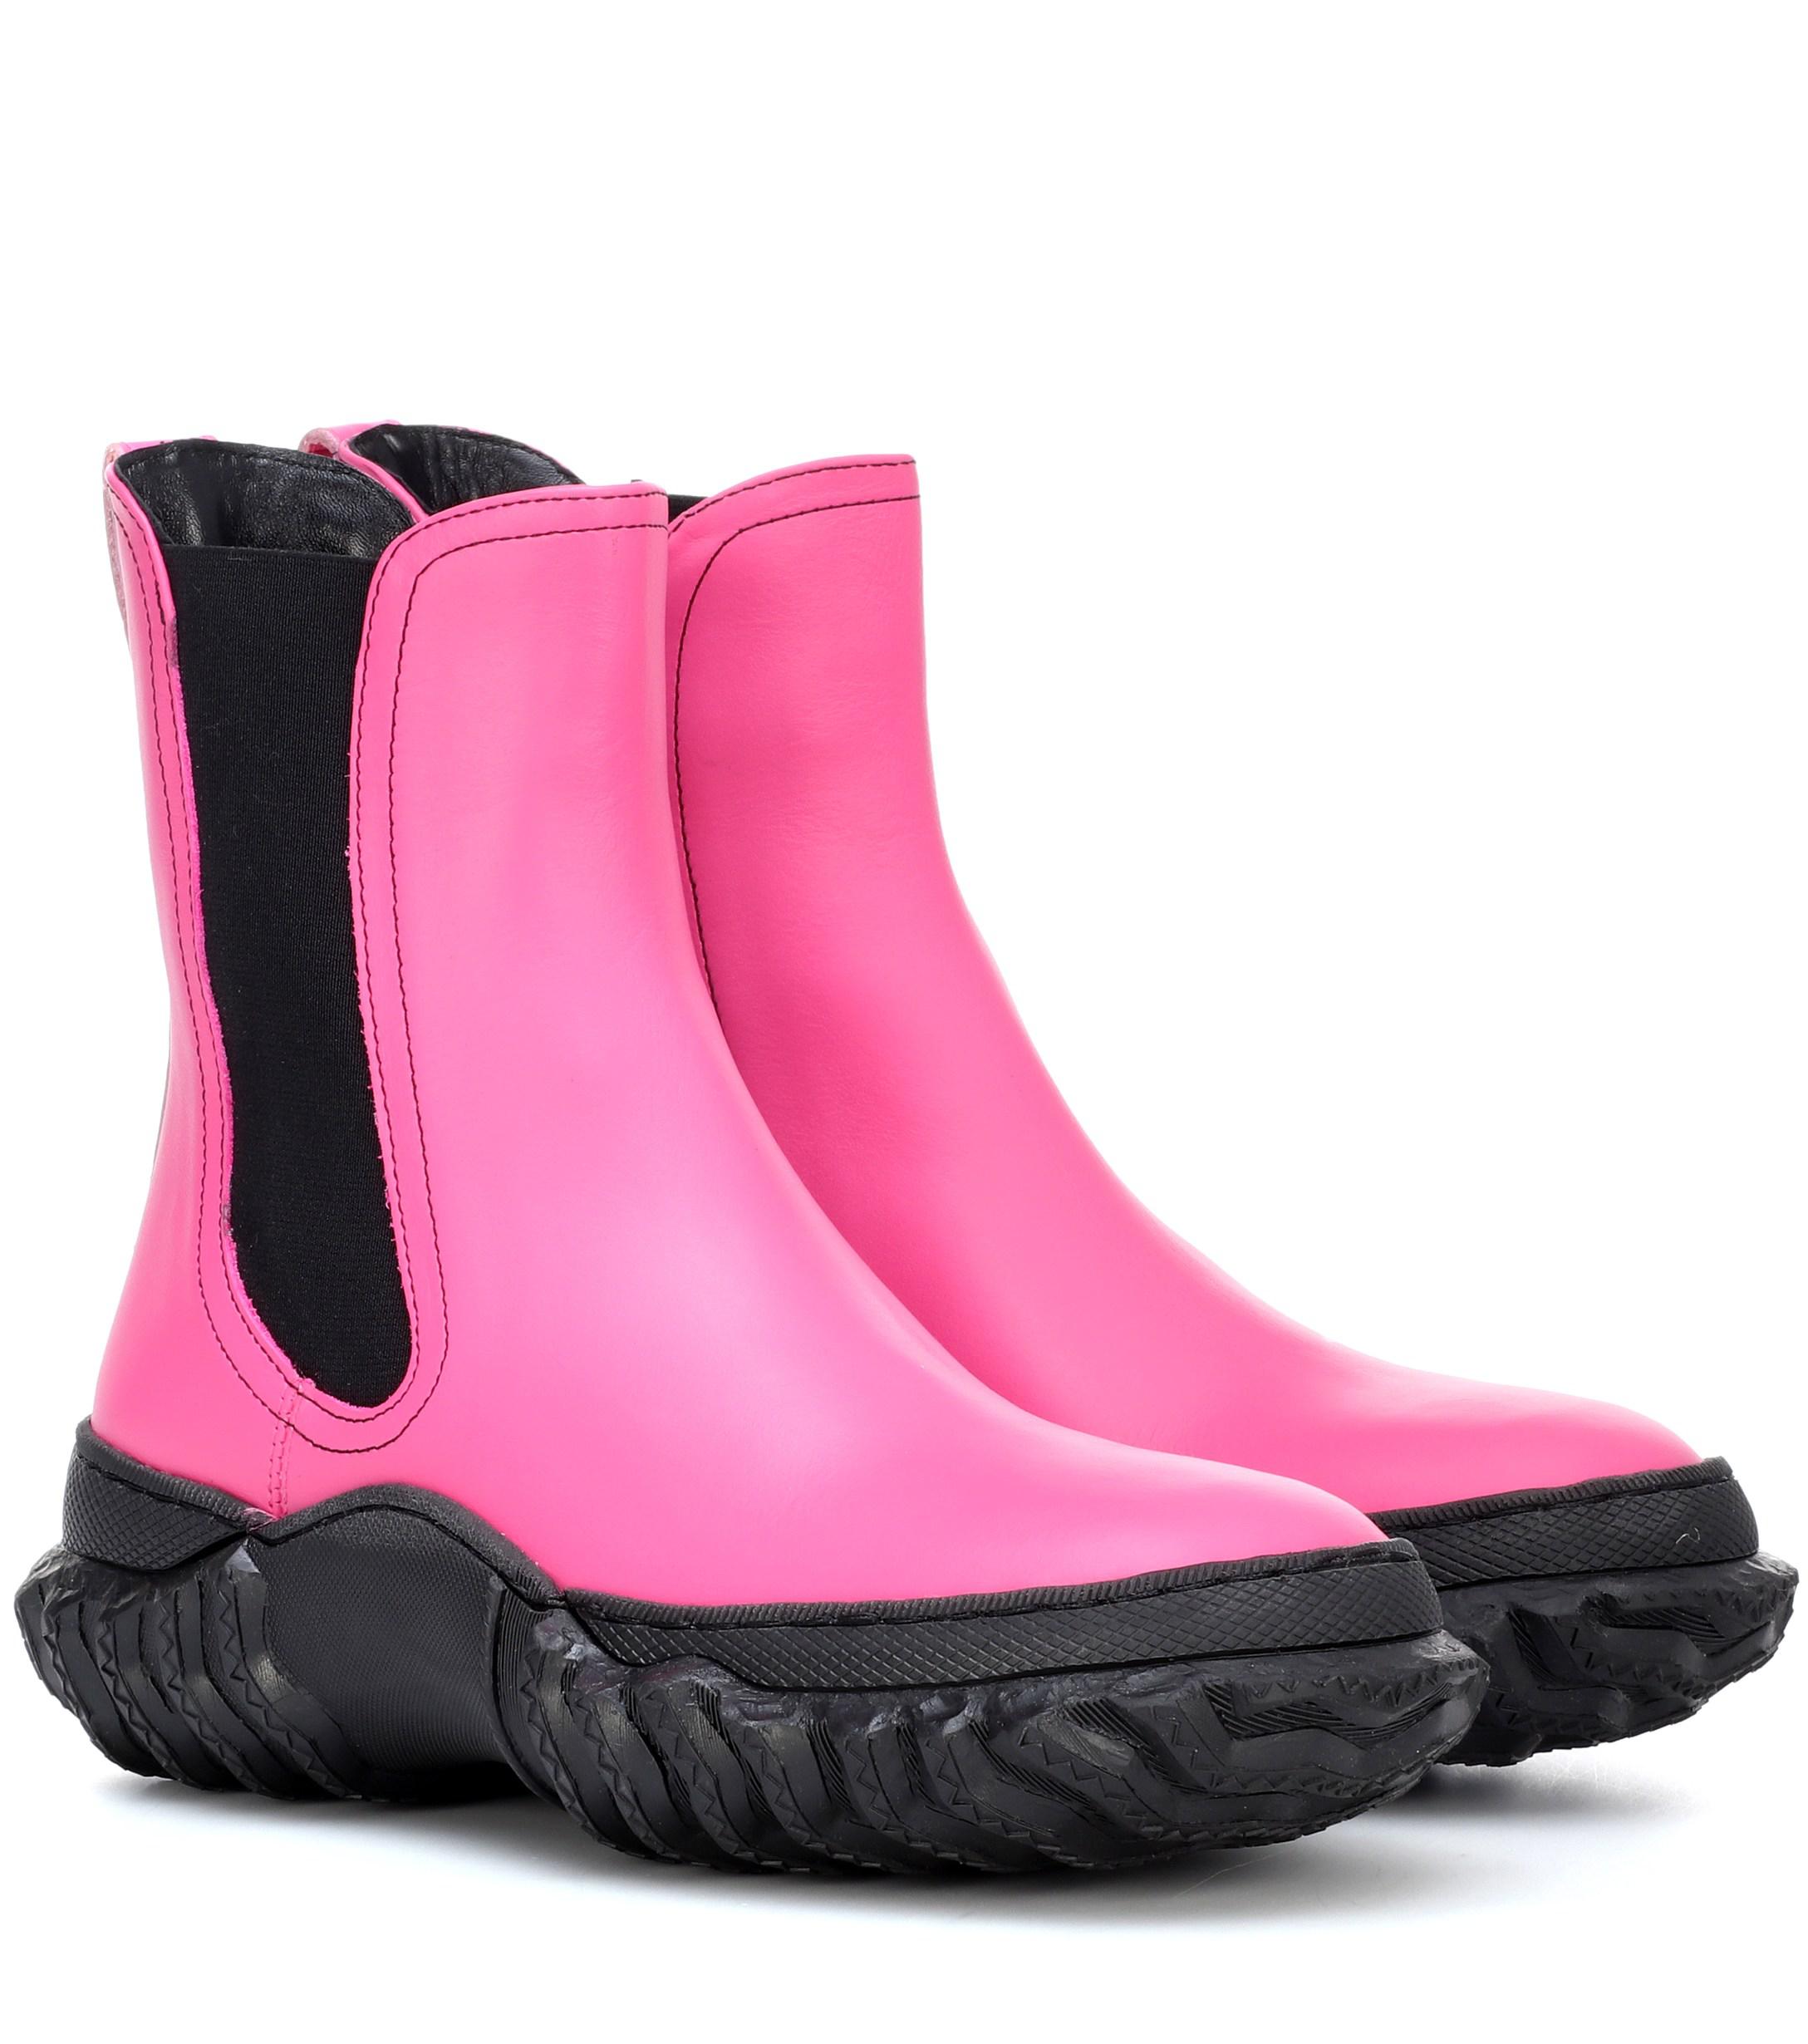 Marni Leather Chelsea Boots in Pink - Lyst